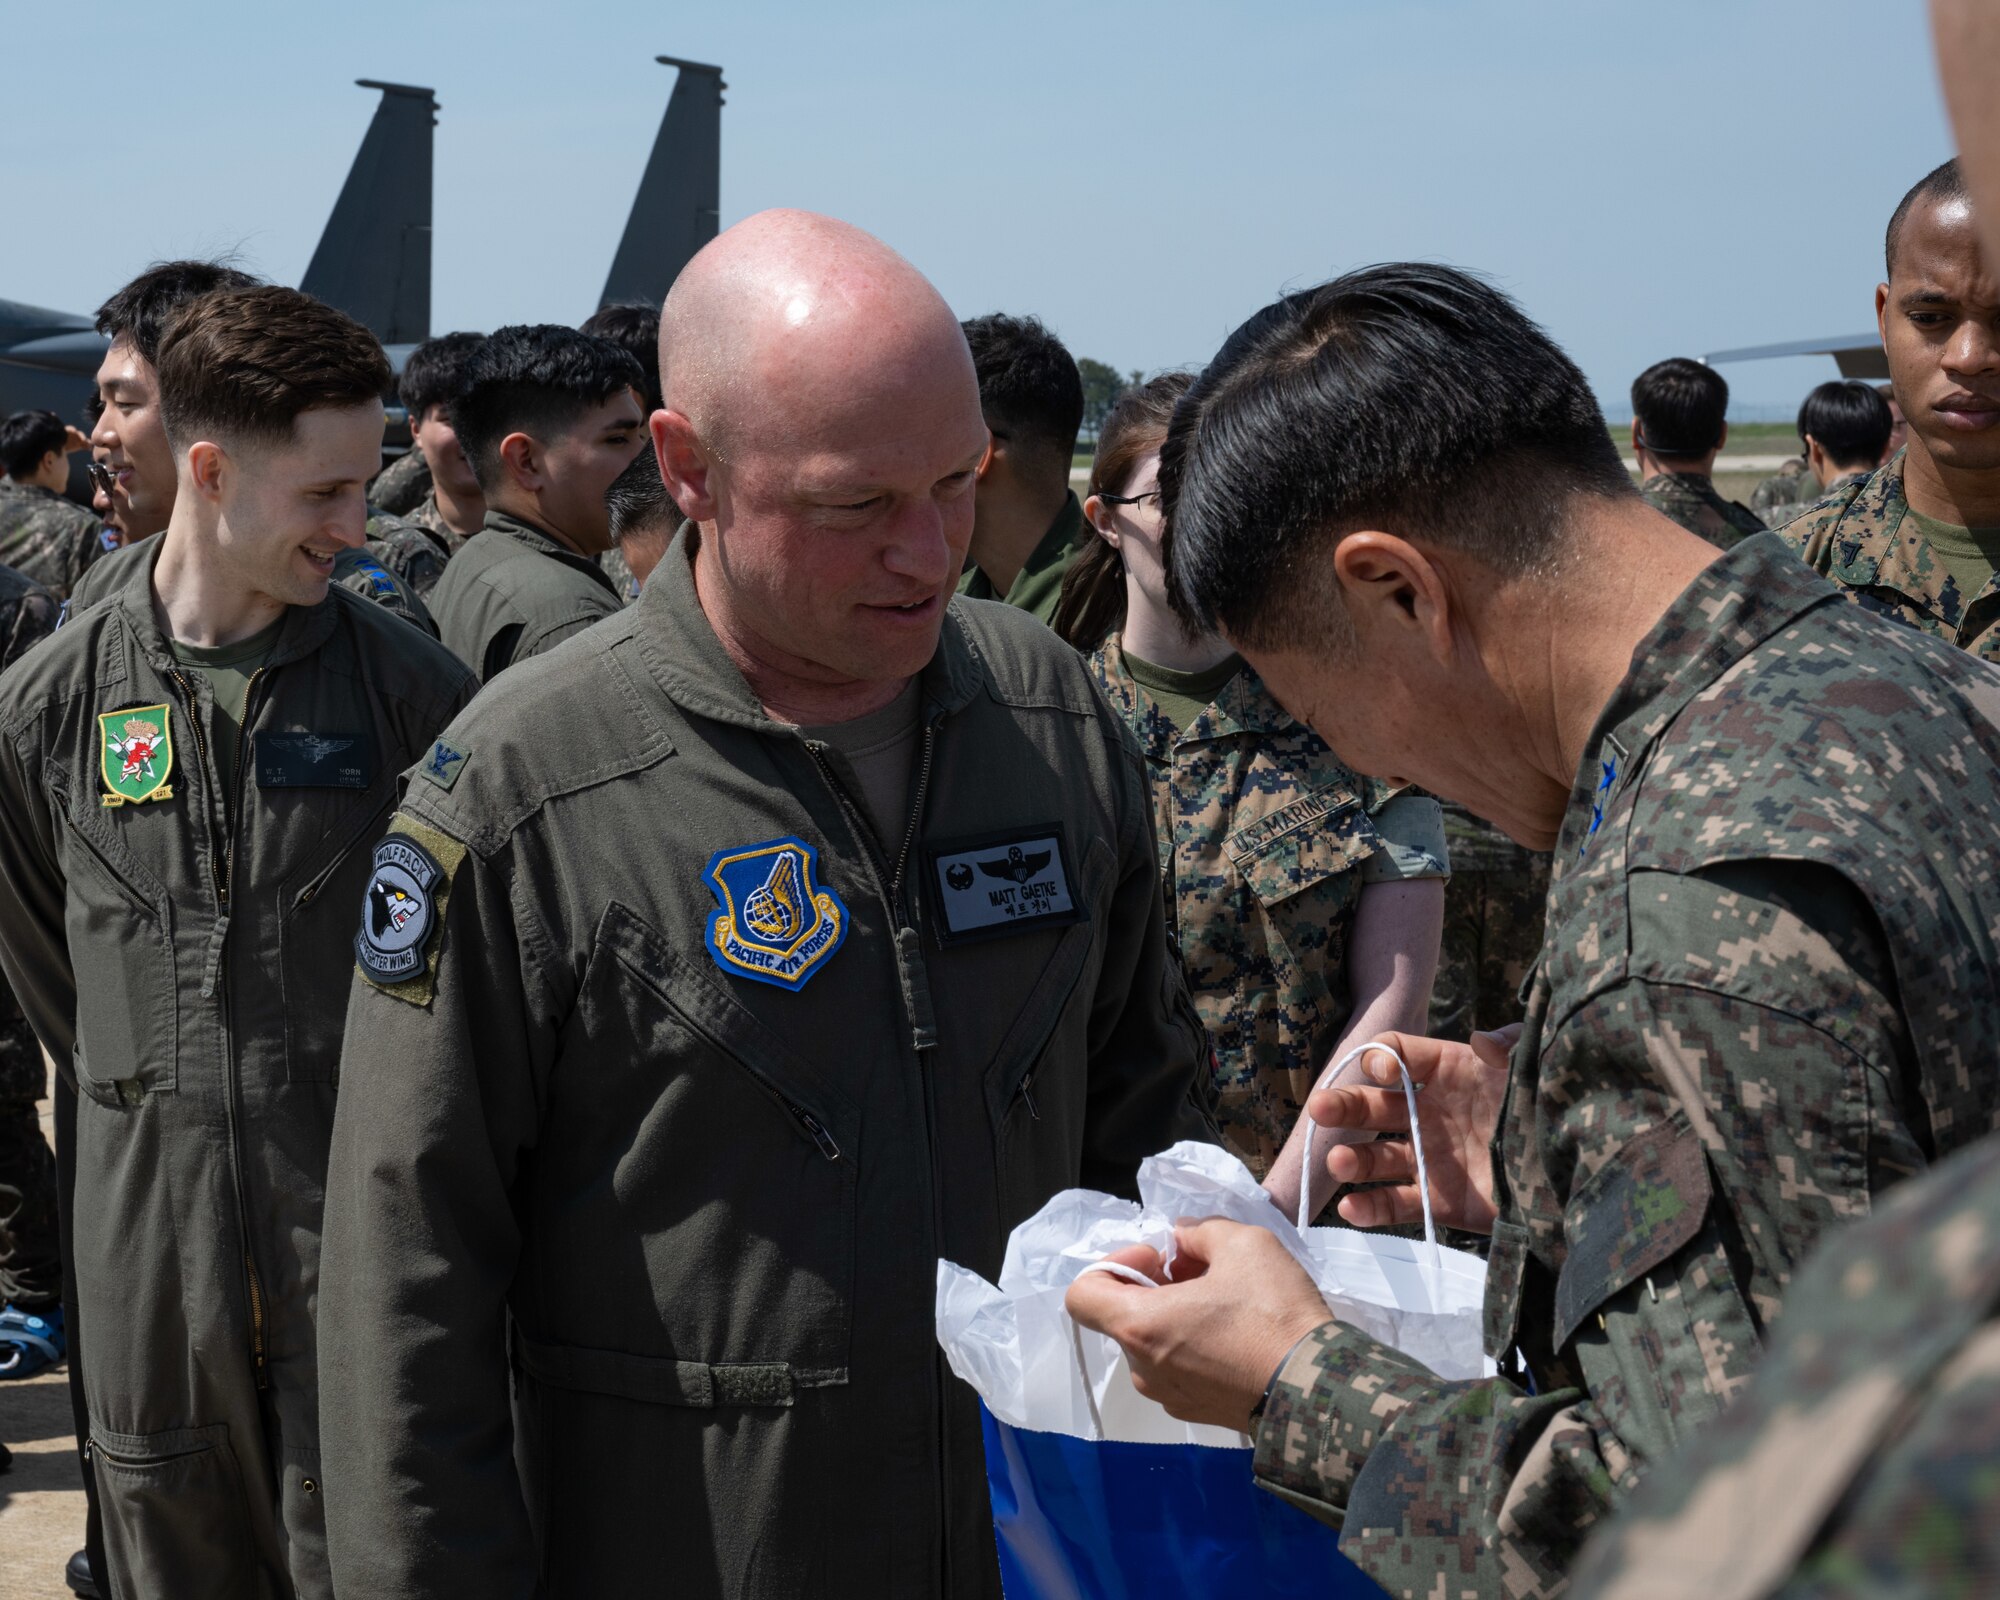 Republic of Korea Air Force Chief of Staff Gen. Lee, Young Su receives a gift from U.S. Air Force Col. Mathew Gaetke, 8th Fighter Wing commander, after his visit to Kunsan Air Base